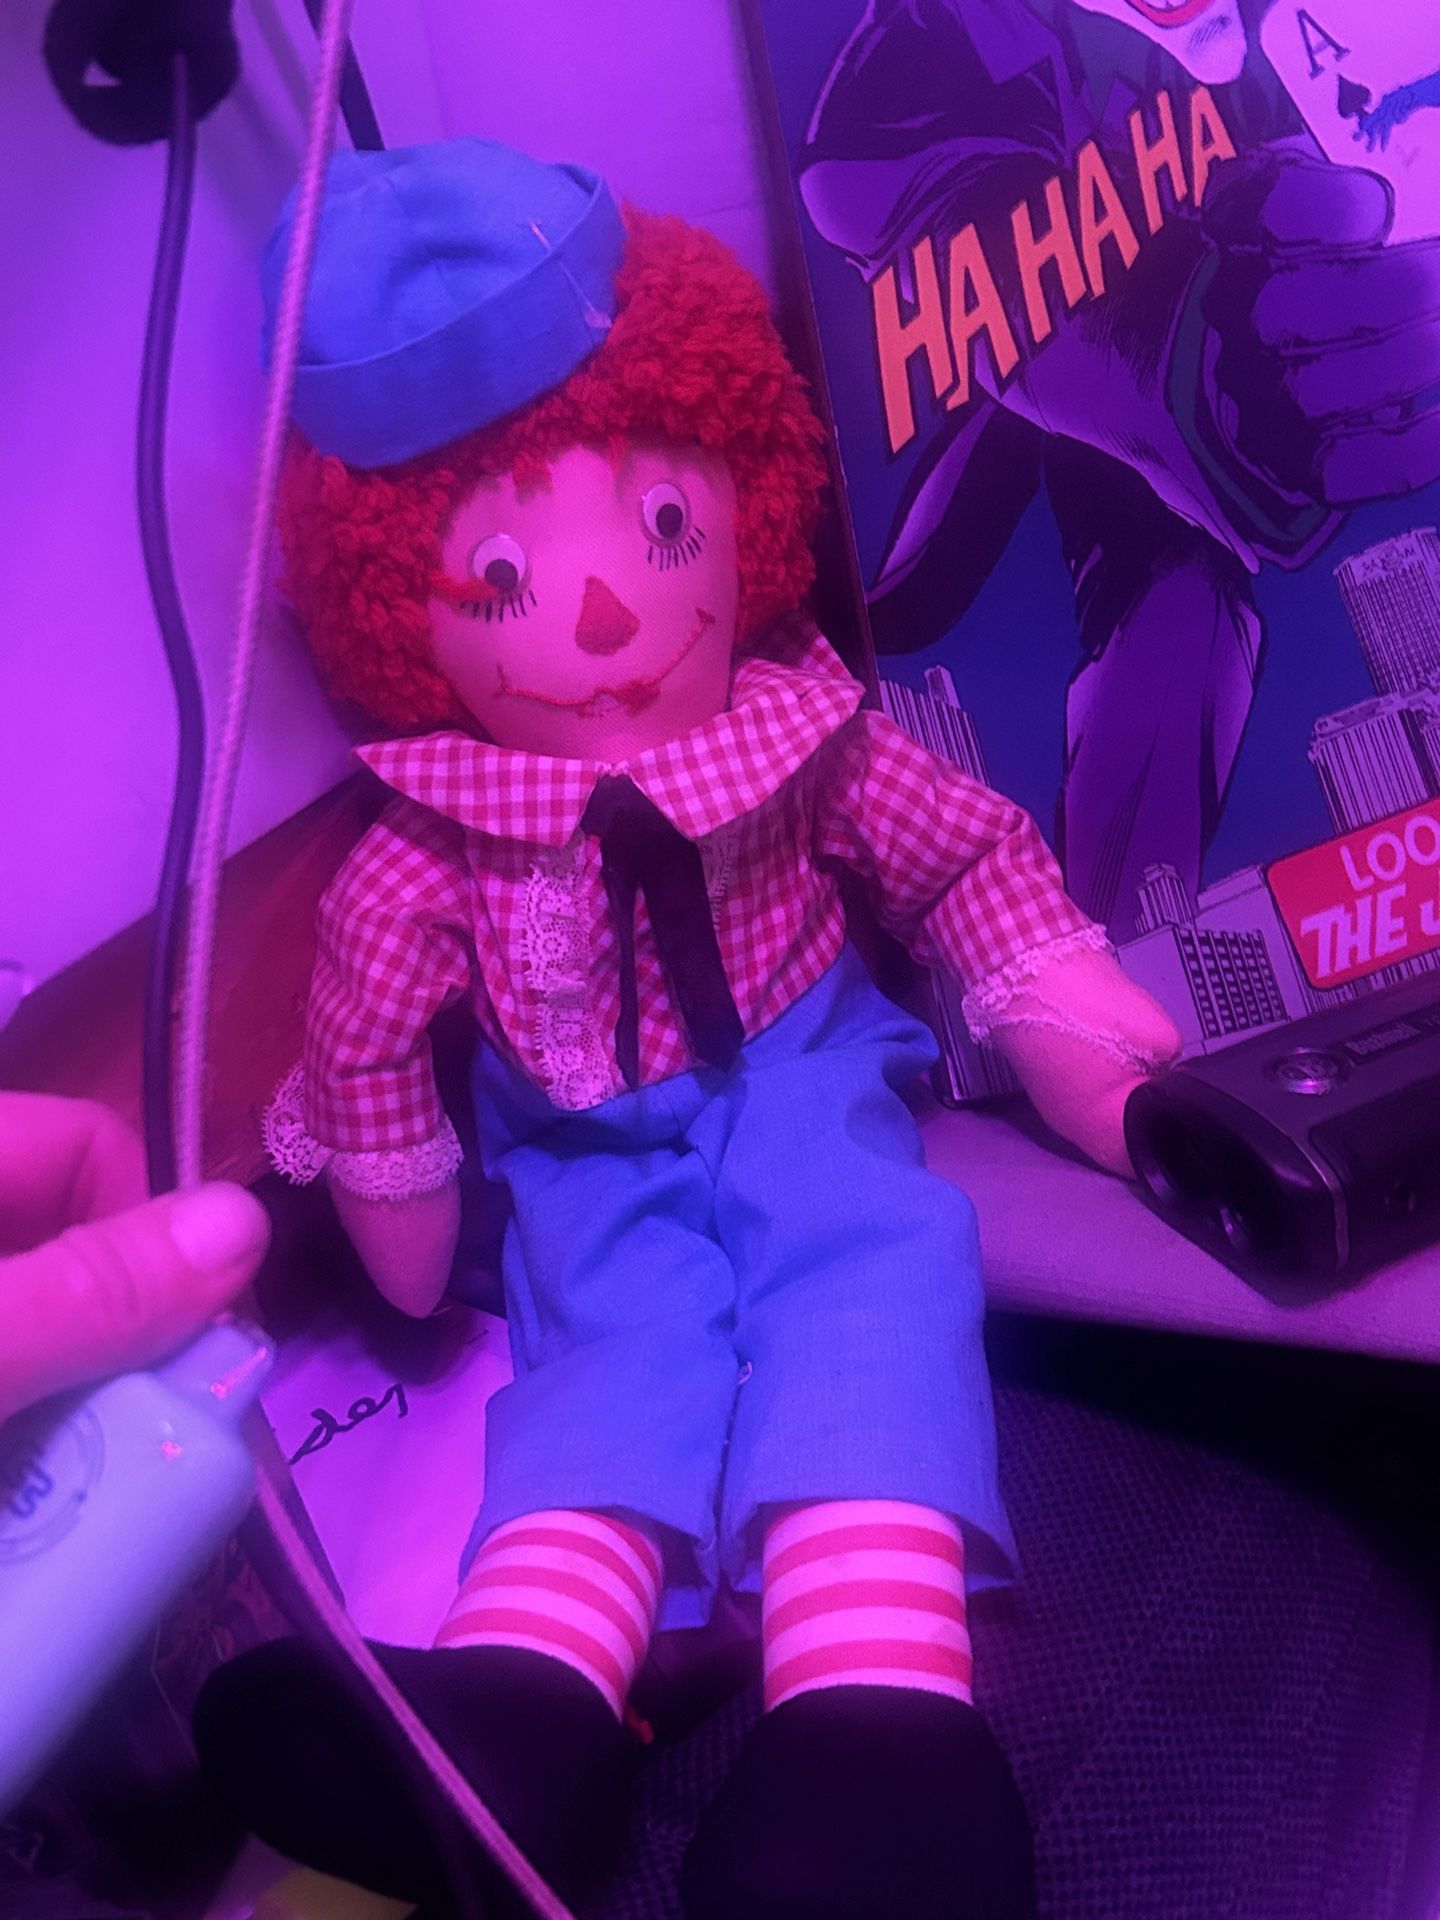 Raggedy Andy 1987. No Asking Price Open And Taking Offers.